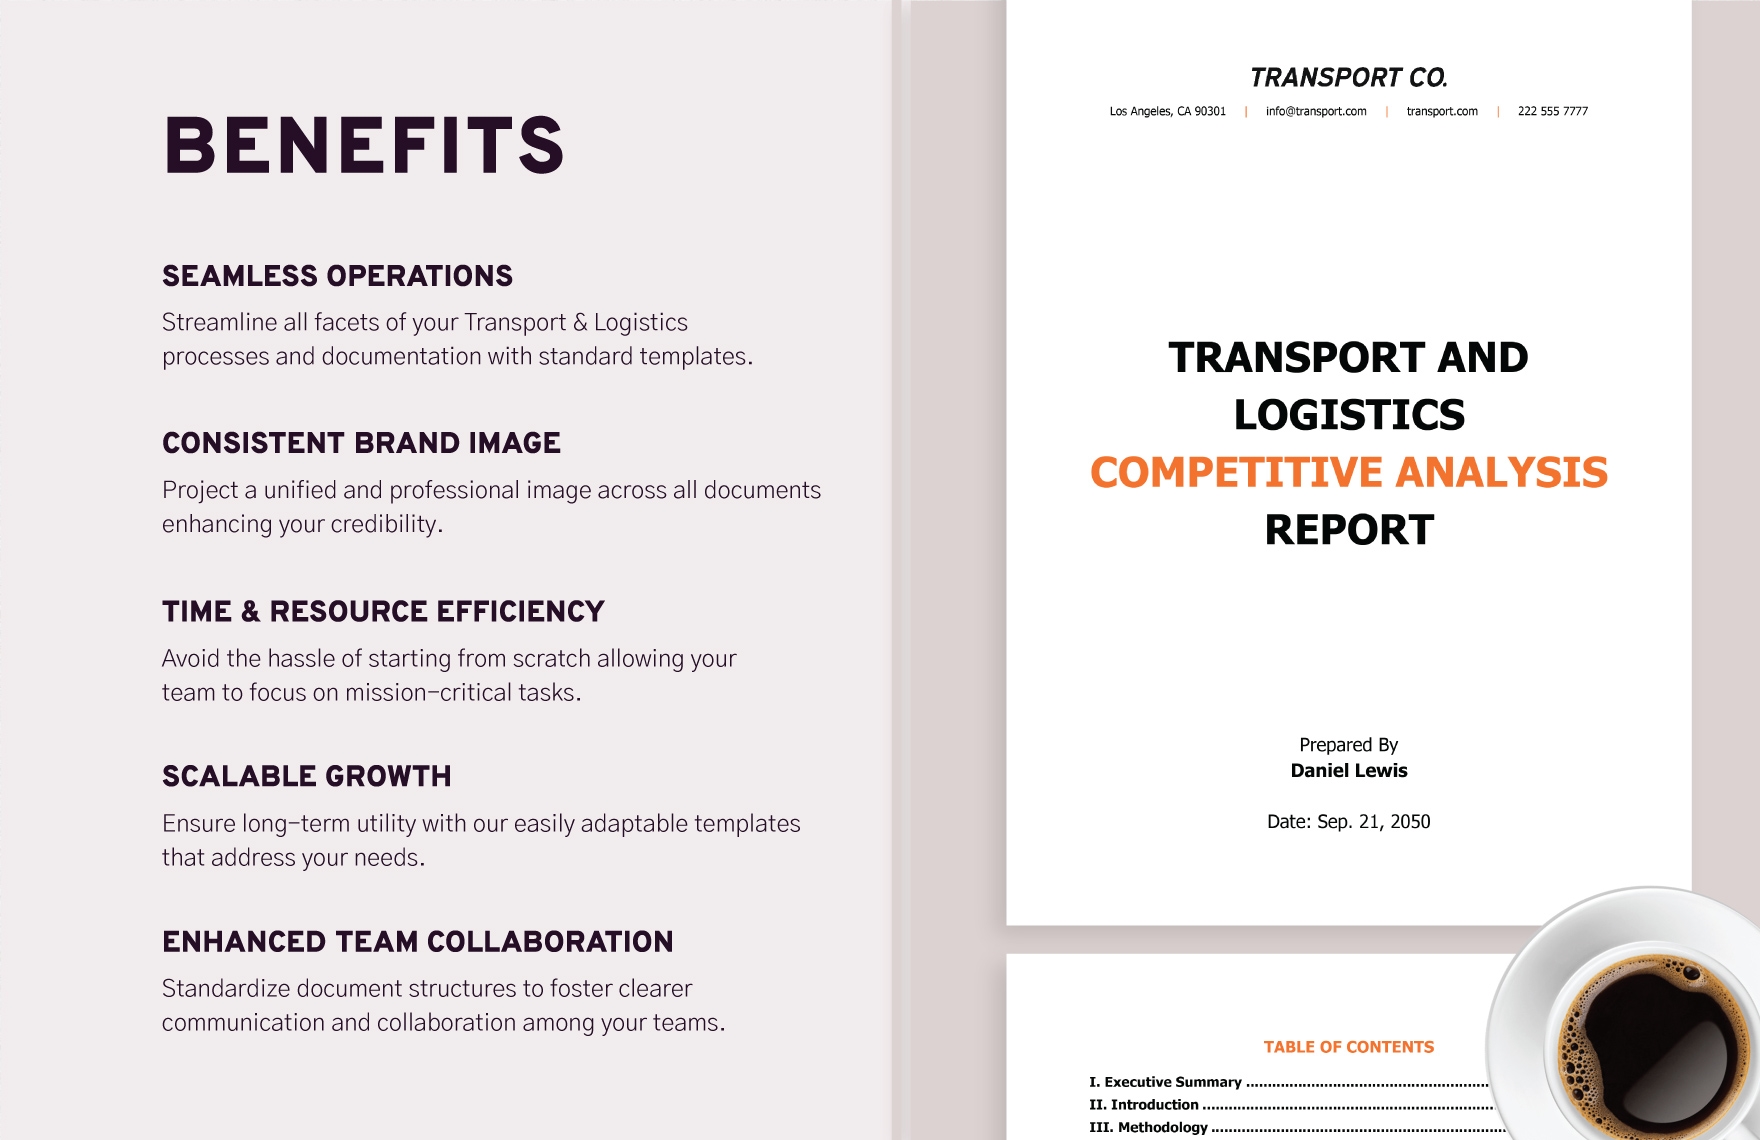 Transport and Logistics Competitive Analysis Report Template